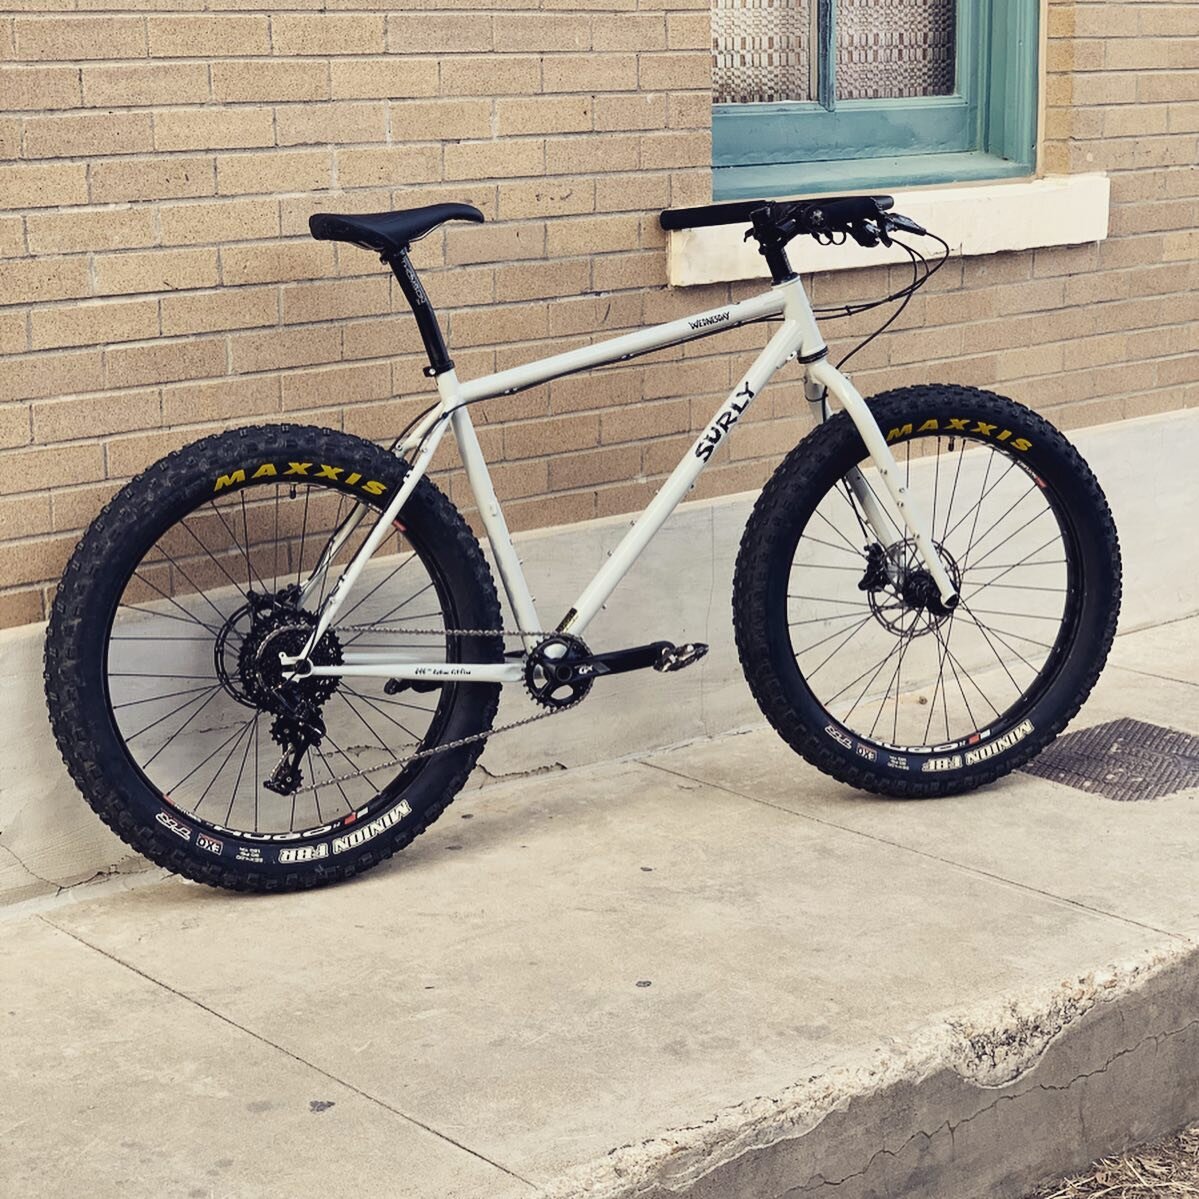 If you are either rolling through the local trails, or hauling gear on an epic touring trip. The cool and collected Surly Wednesday will get you to through just about anything with it&rsquo;s modern tail geometry paired with the versatility of a tour